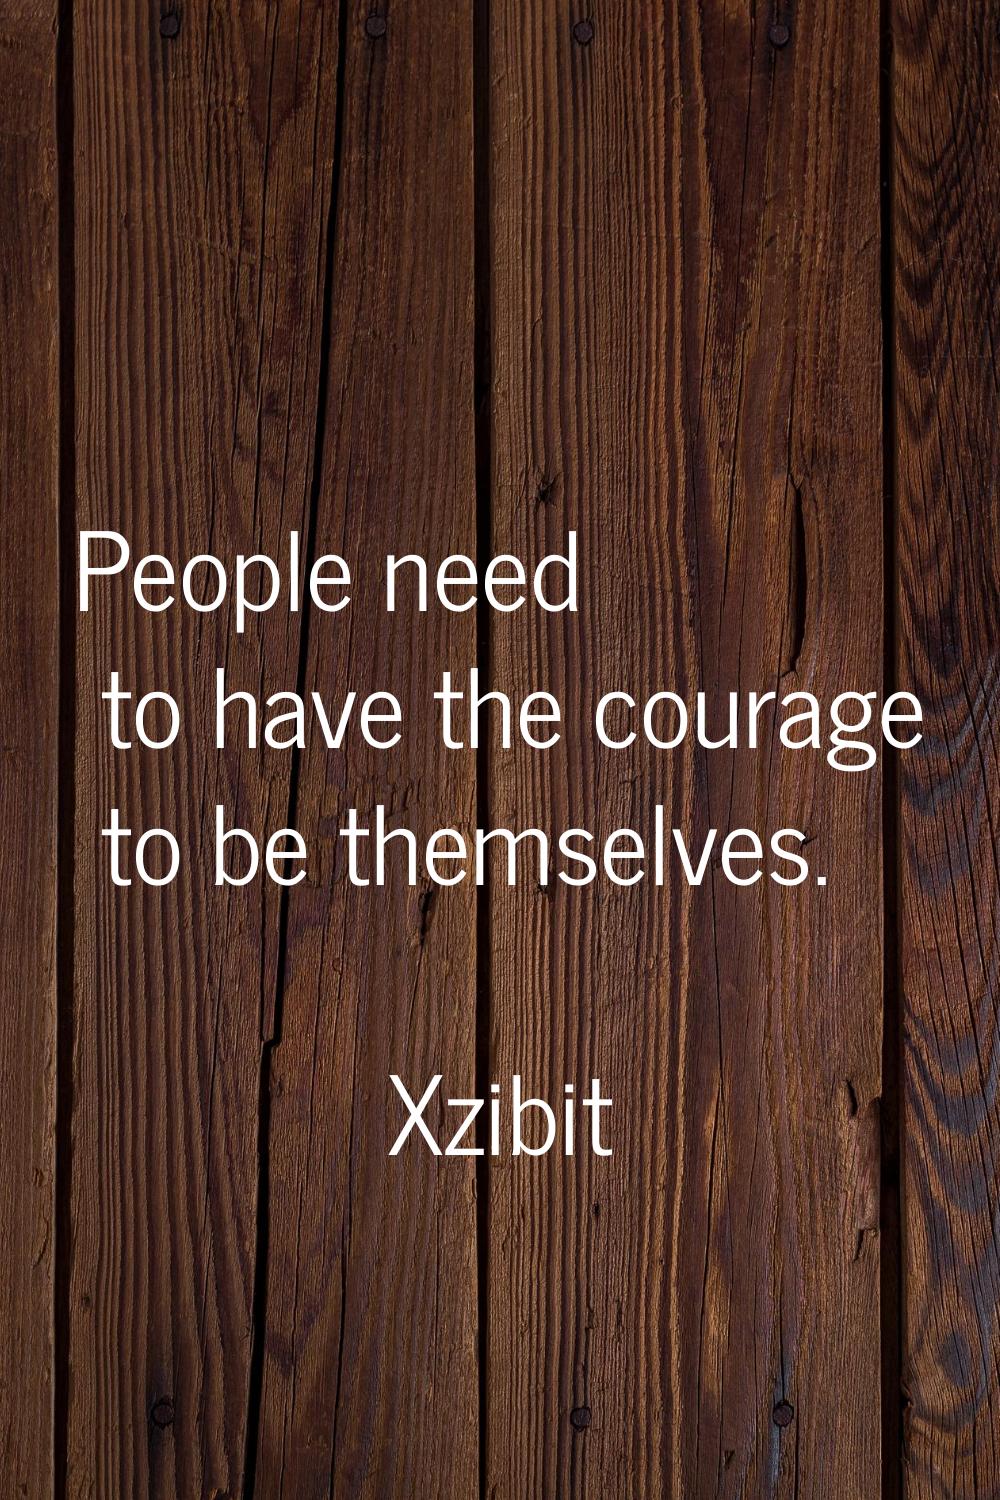 People need to have the courage to be themselves.